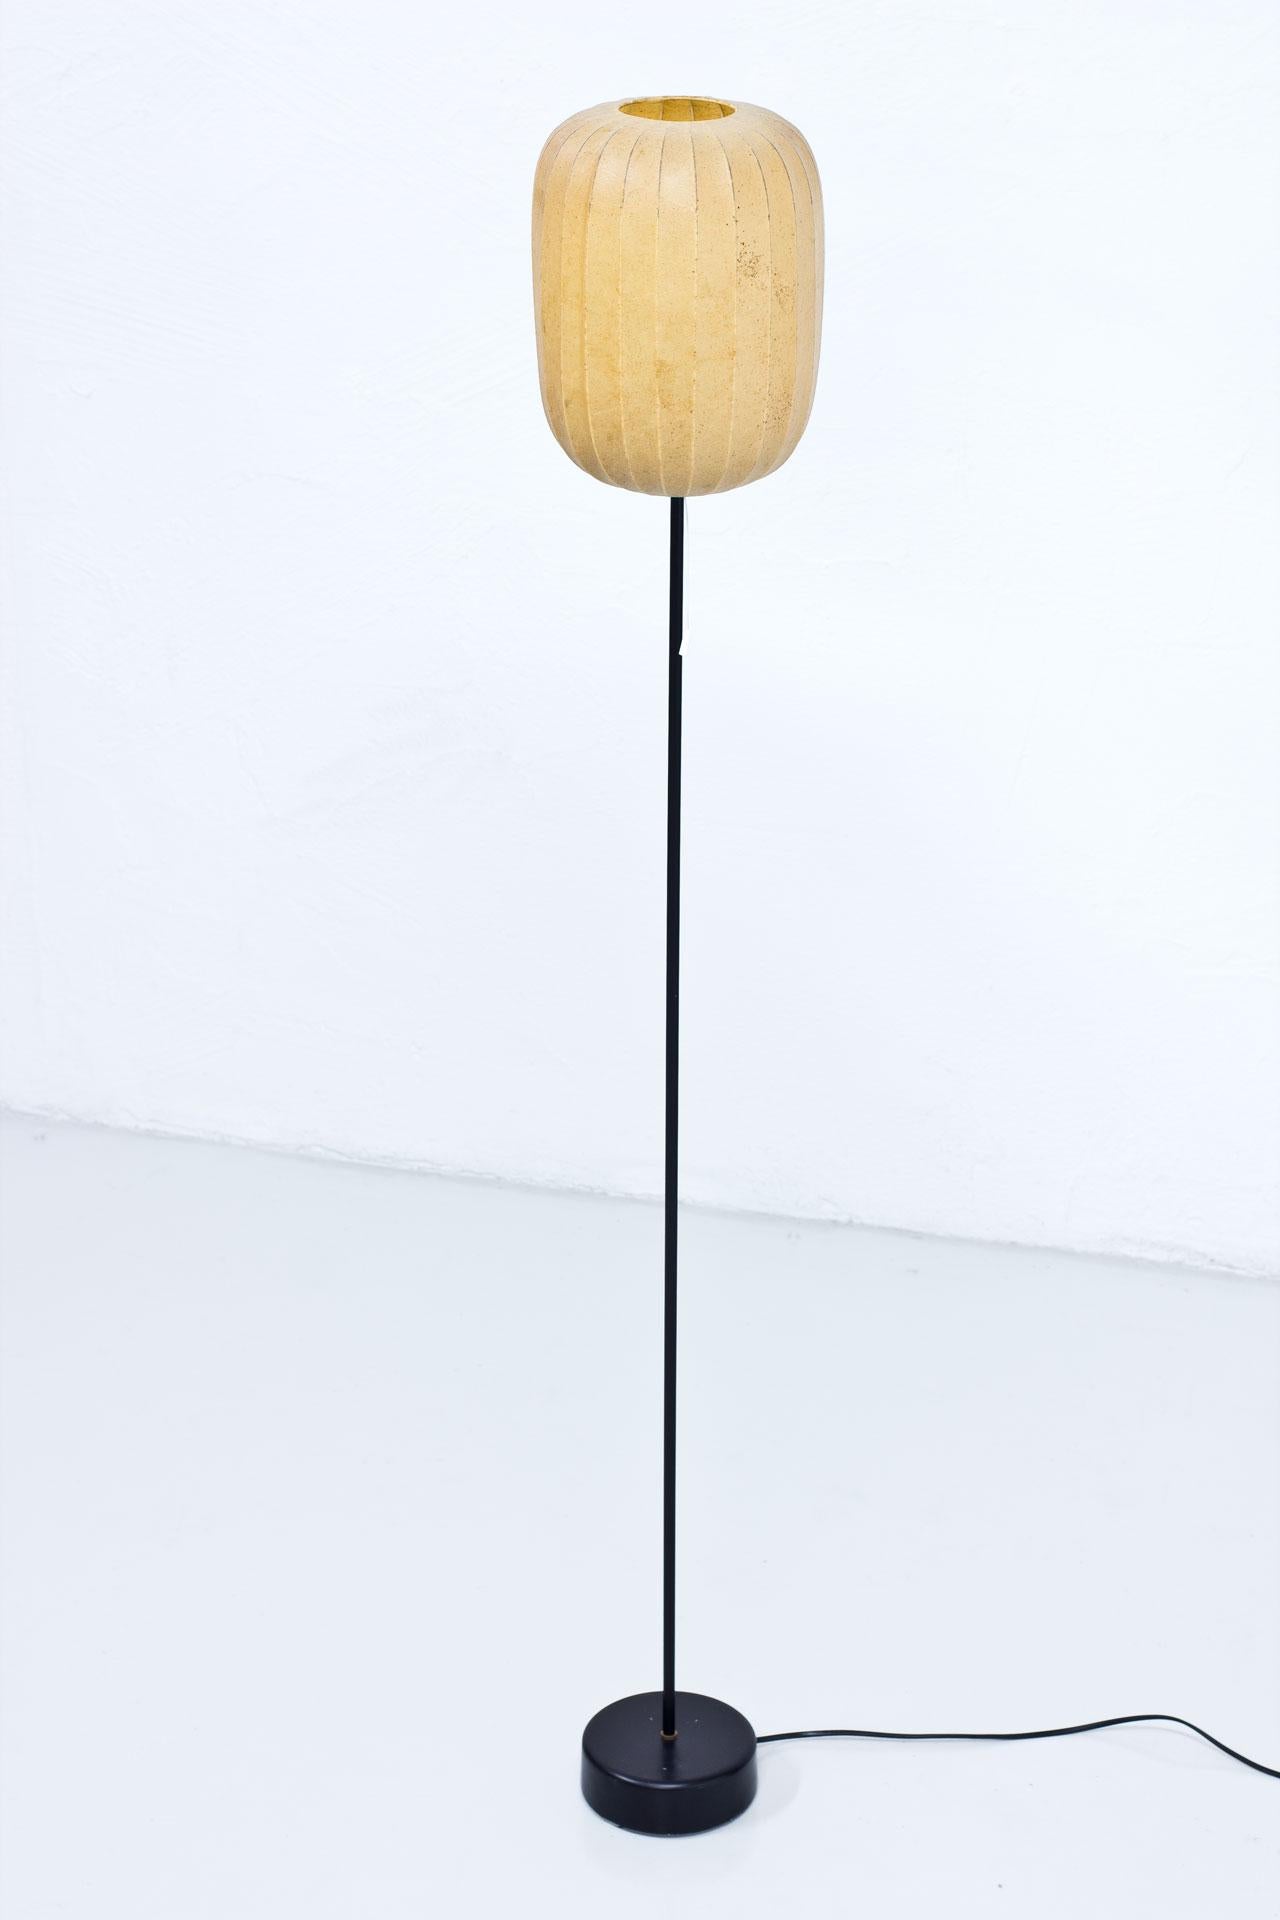 Rare floor lamp designed by Hans Bergström manufactured by Ateljé Lyktan in Sweden
during the 1950s. Black metal stem, cocoon sprayed plastic shade. Rewired.